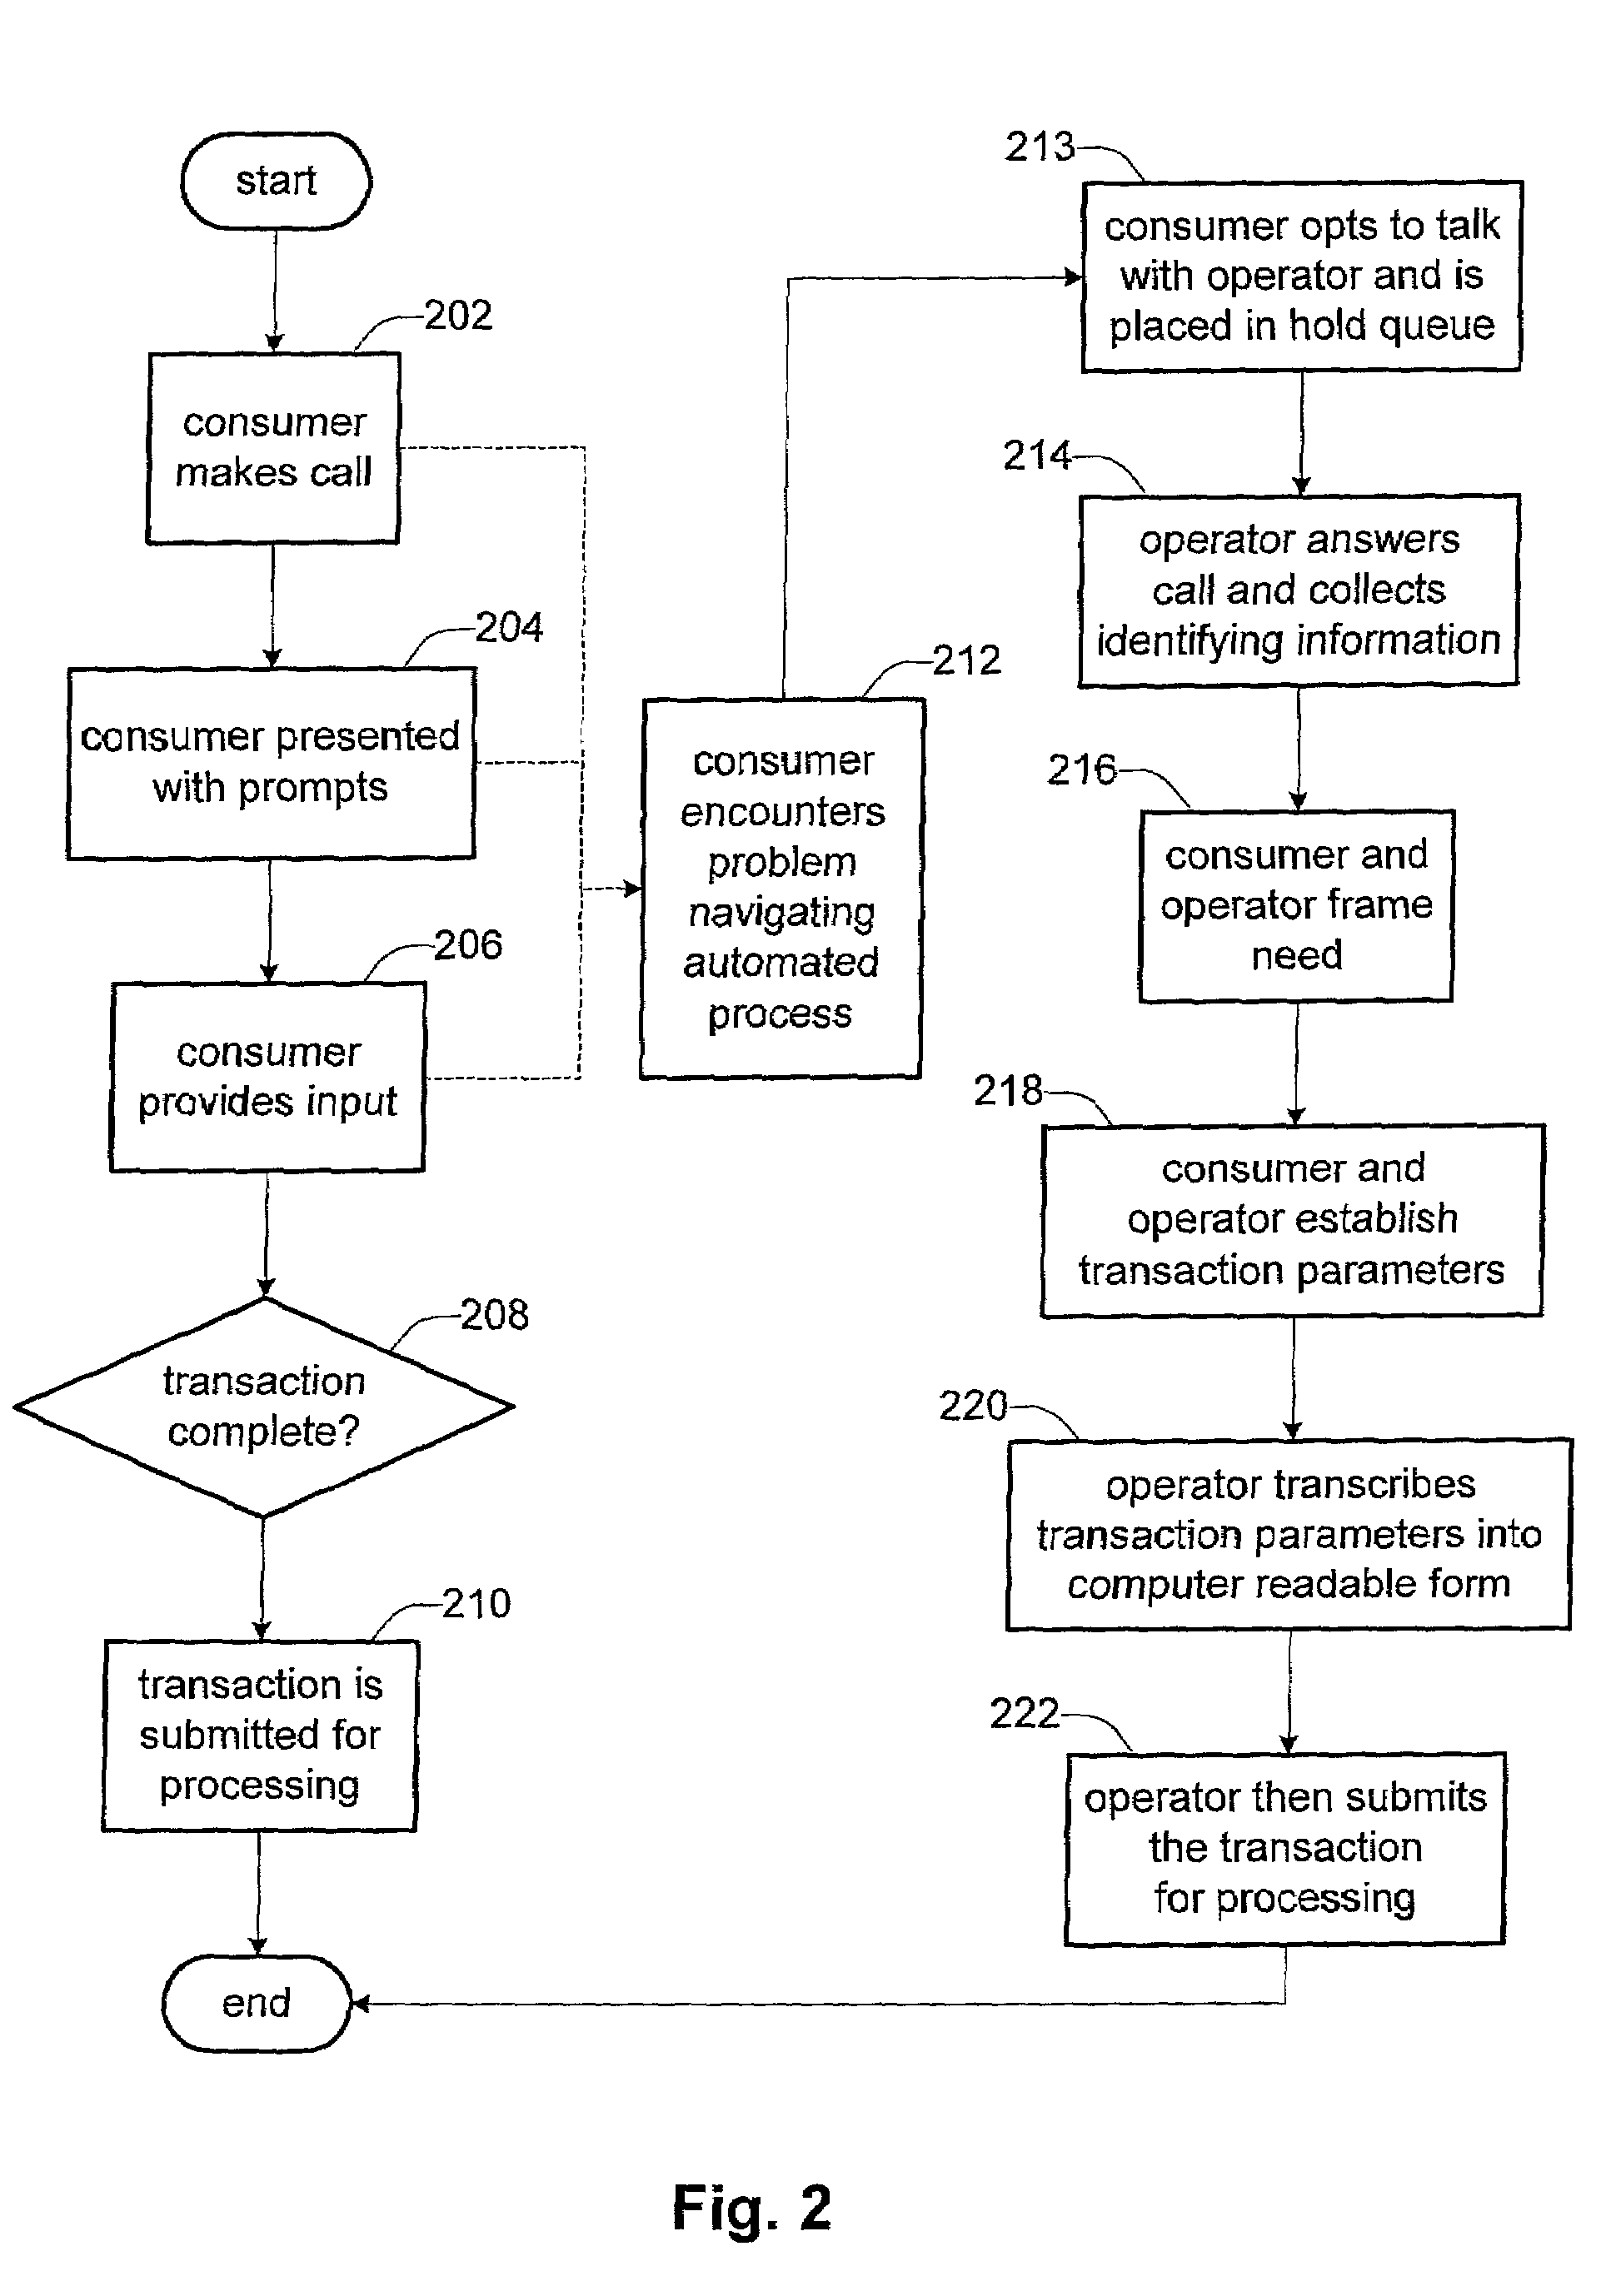 Syntax-driven, operator assisted voice recognition system and methods